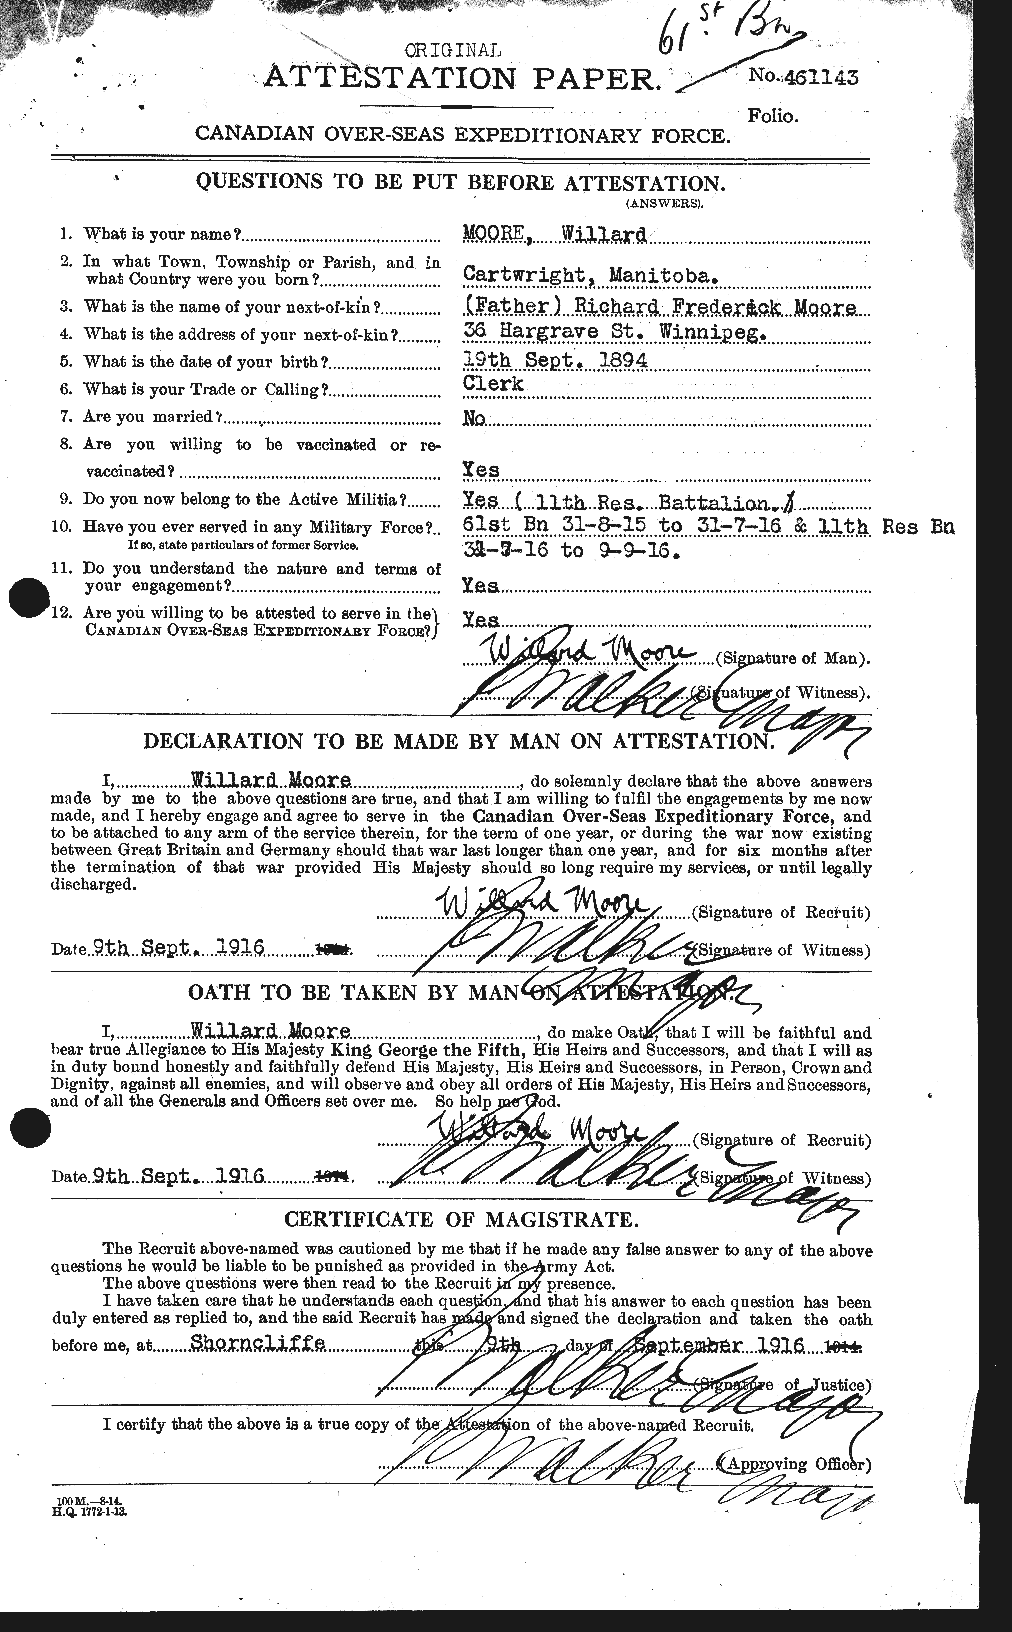 Personnel Records of the First World War - CEF 505732a